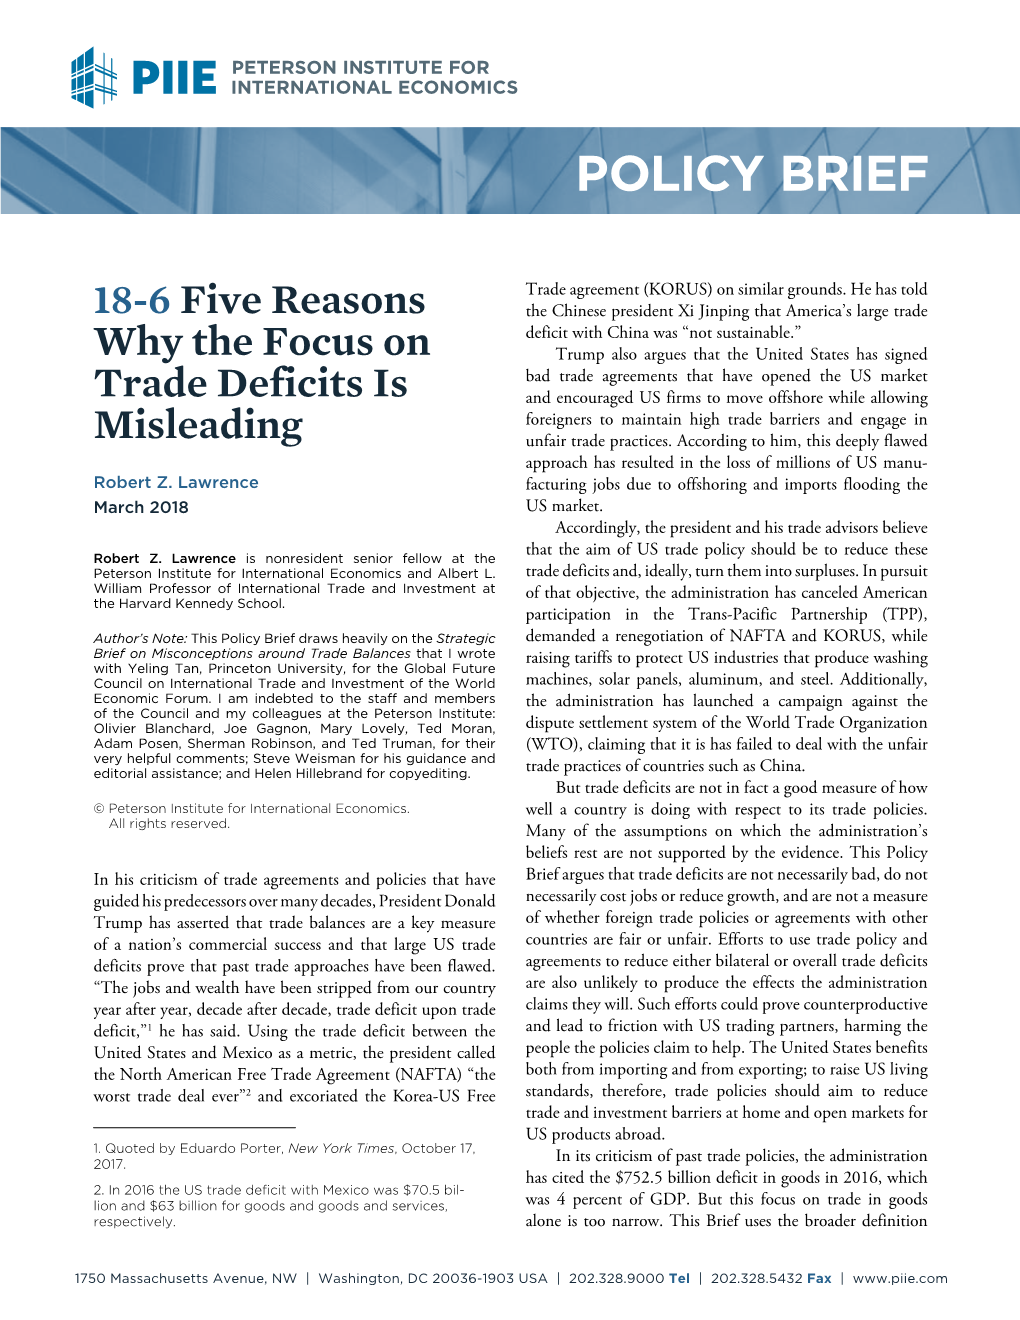 Policy Brief 18-6: Five Reasons Why the Focus on Trade Deficits Is Misleading